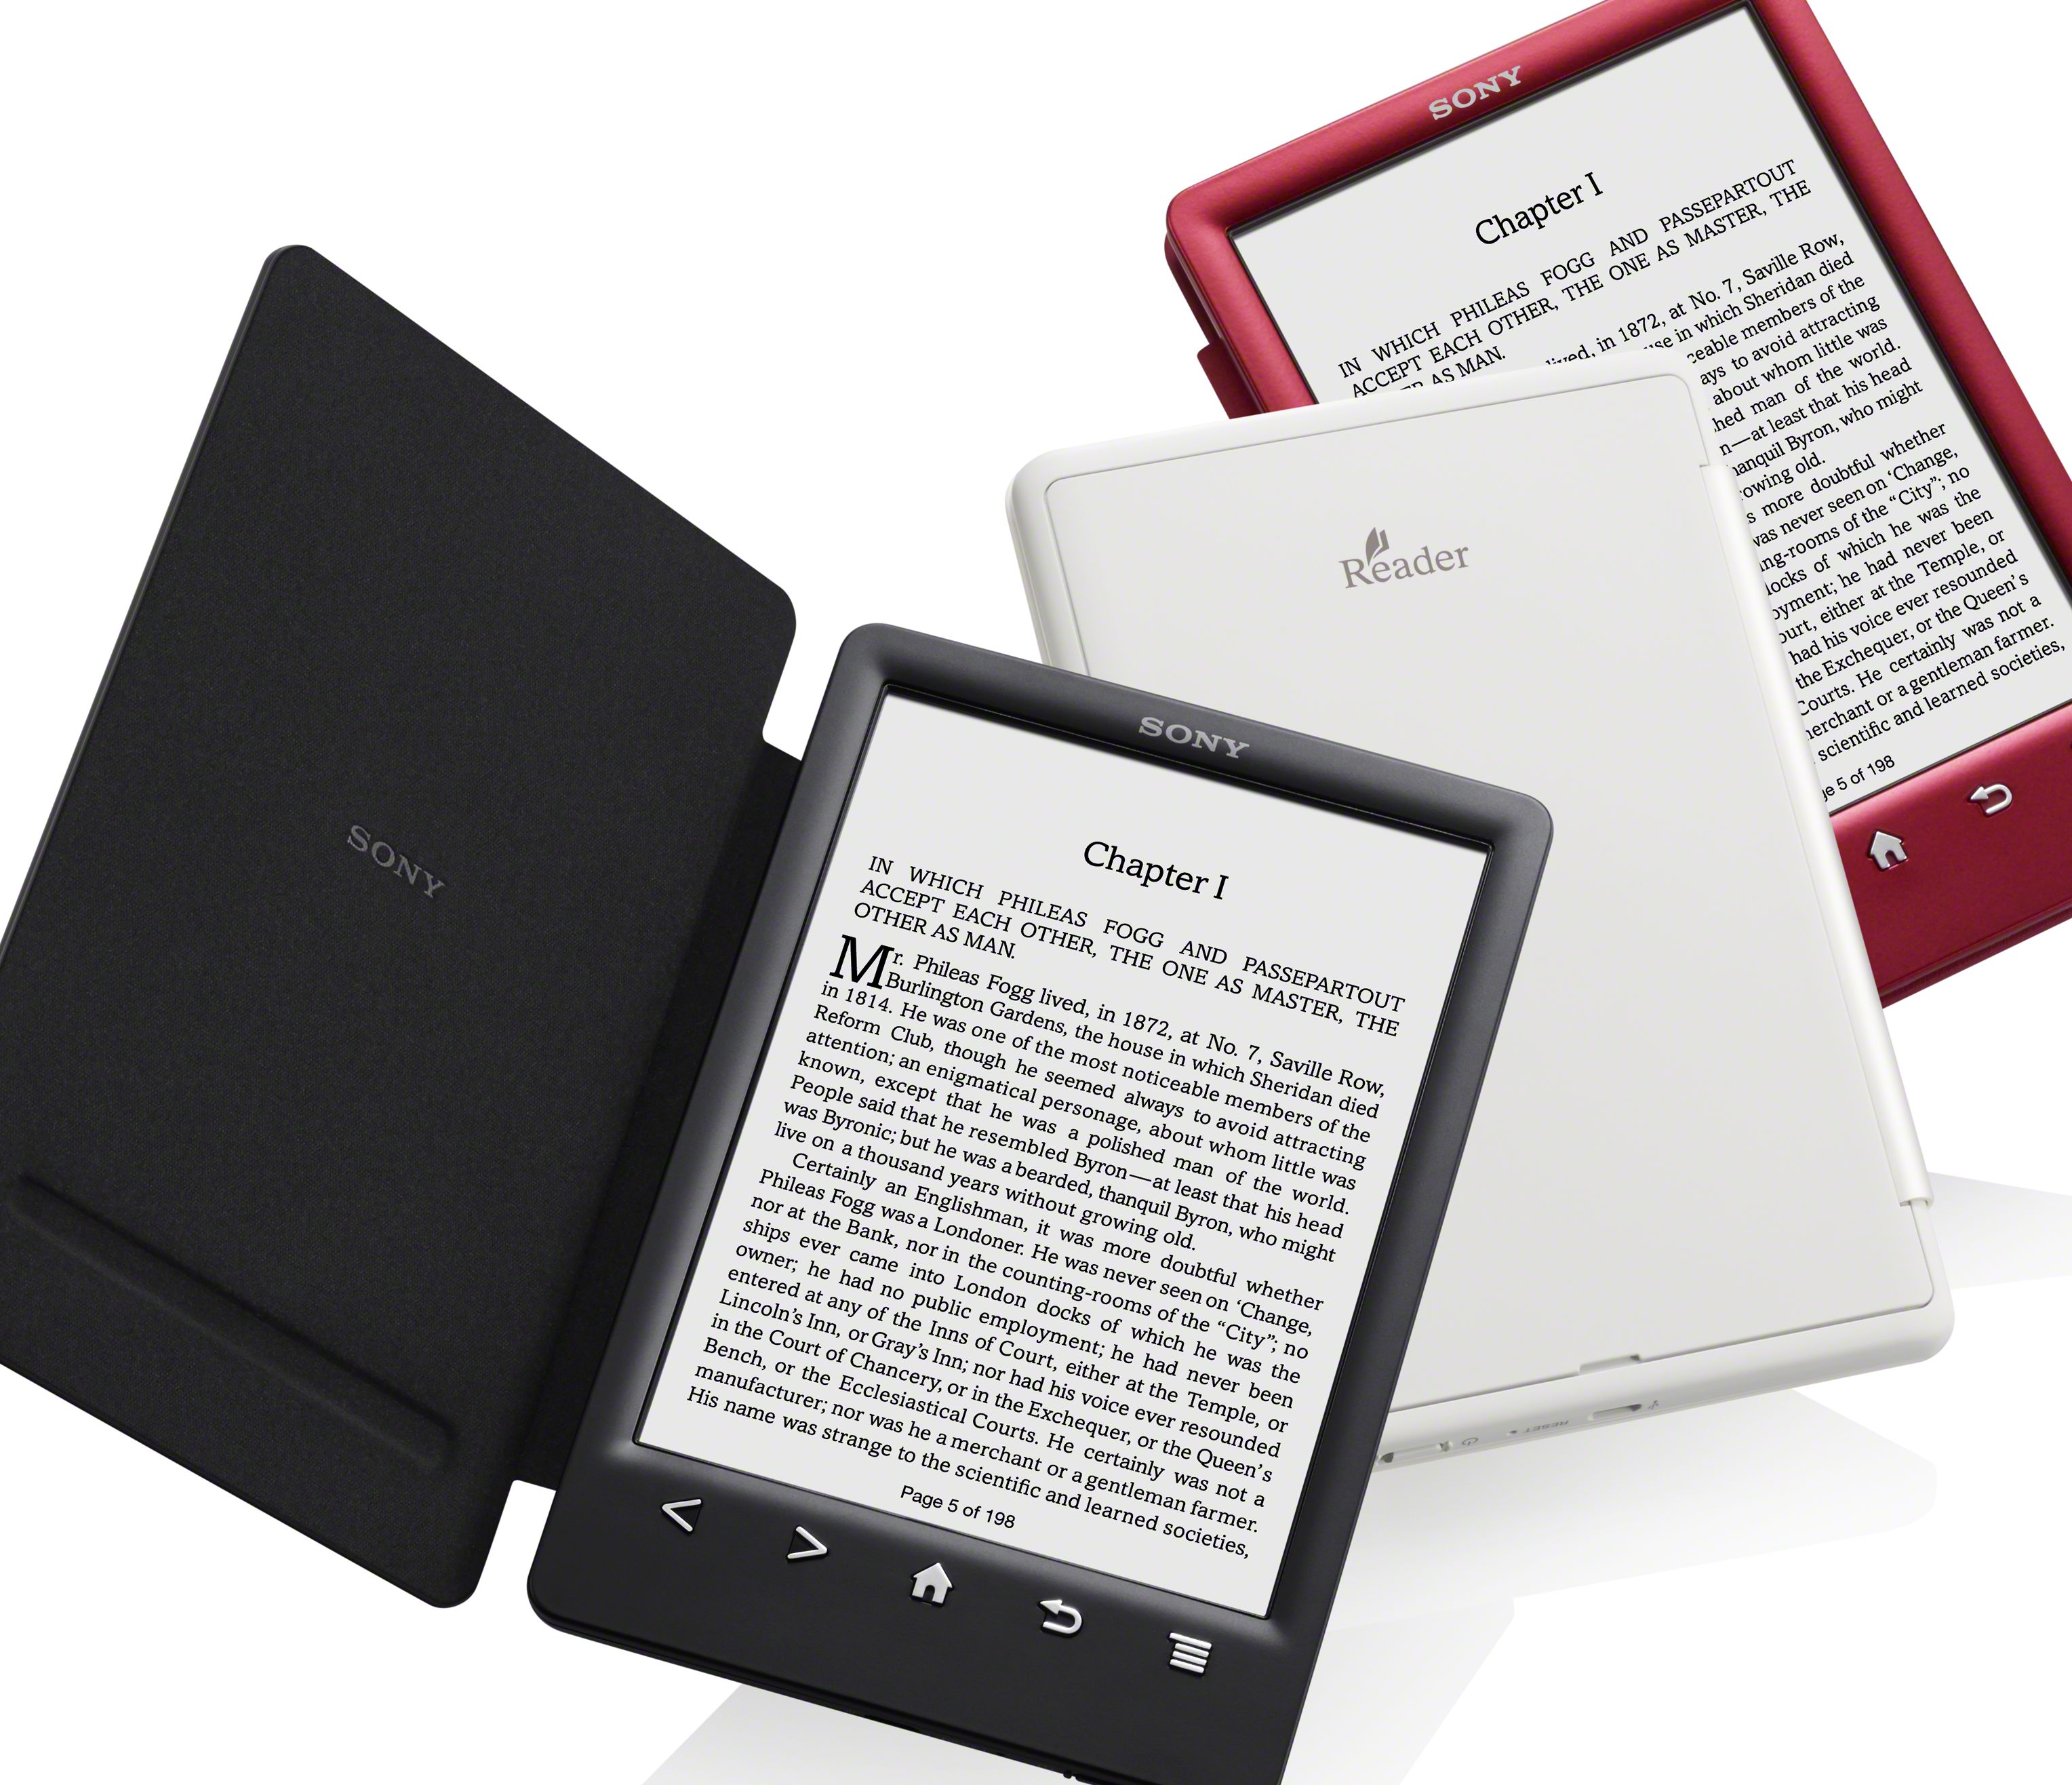 What you to know if you purchase an old Sony Good e-Reader